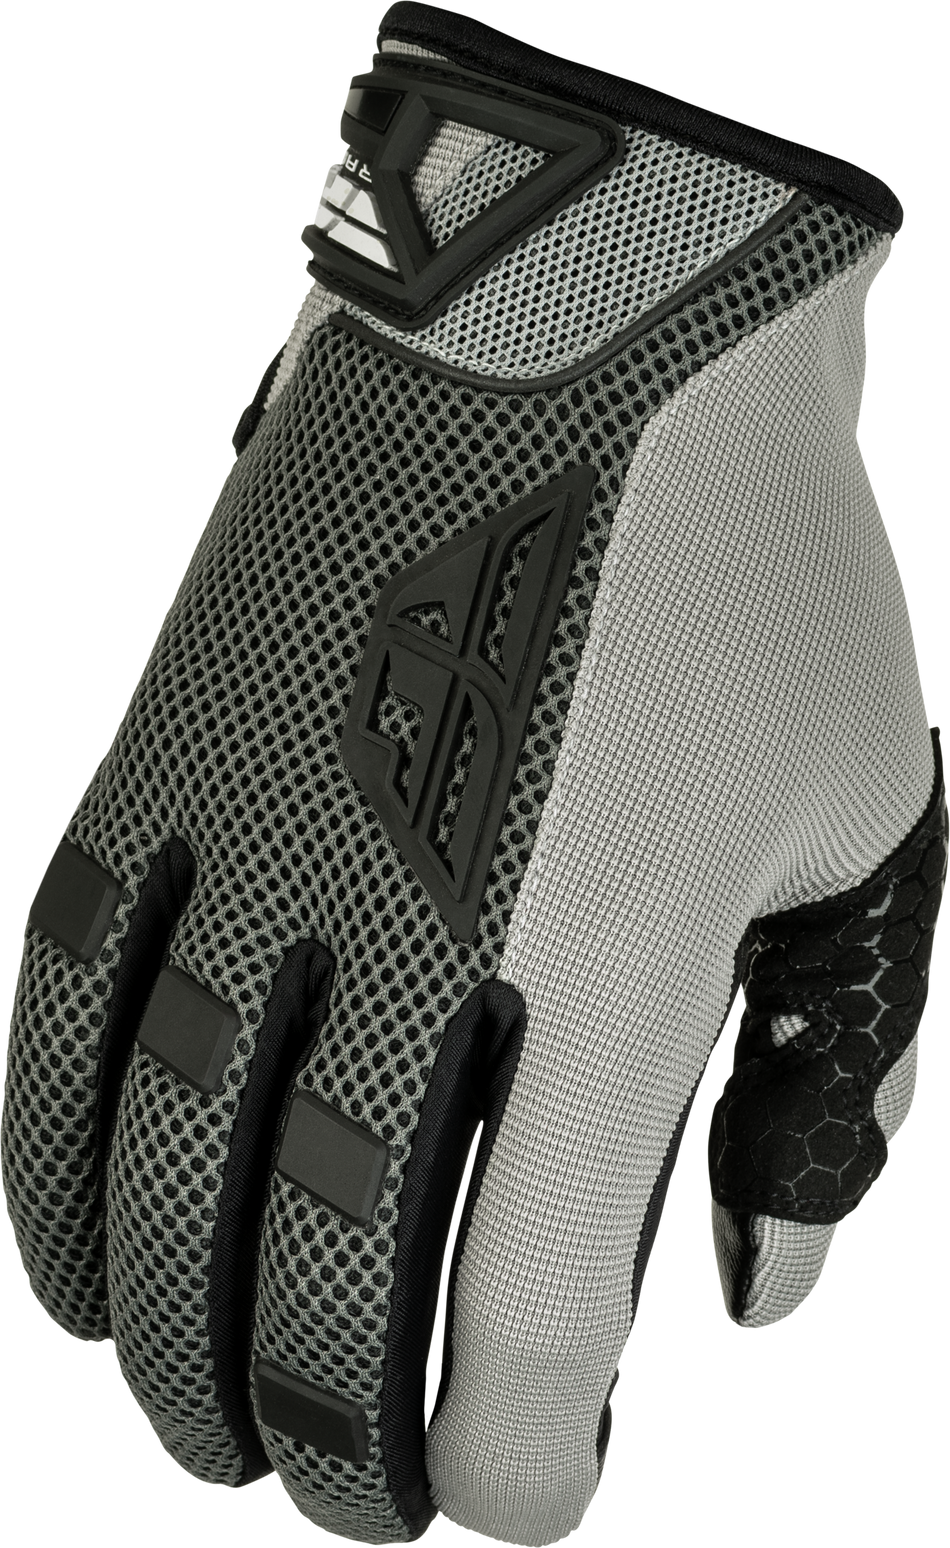 FLY RACING Coolpro Gloves Grey Lg 476-4025L